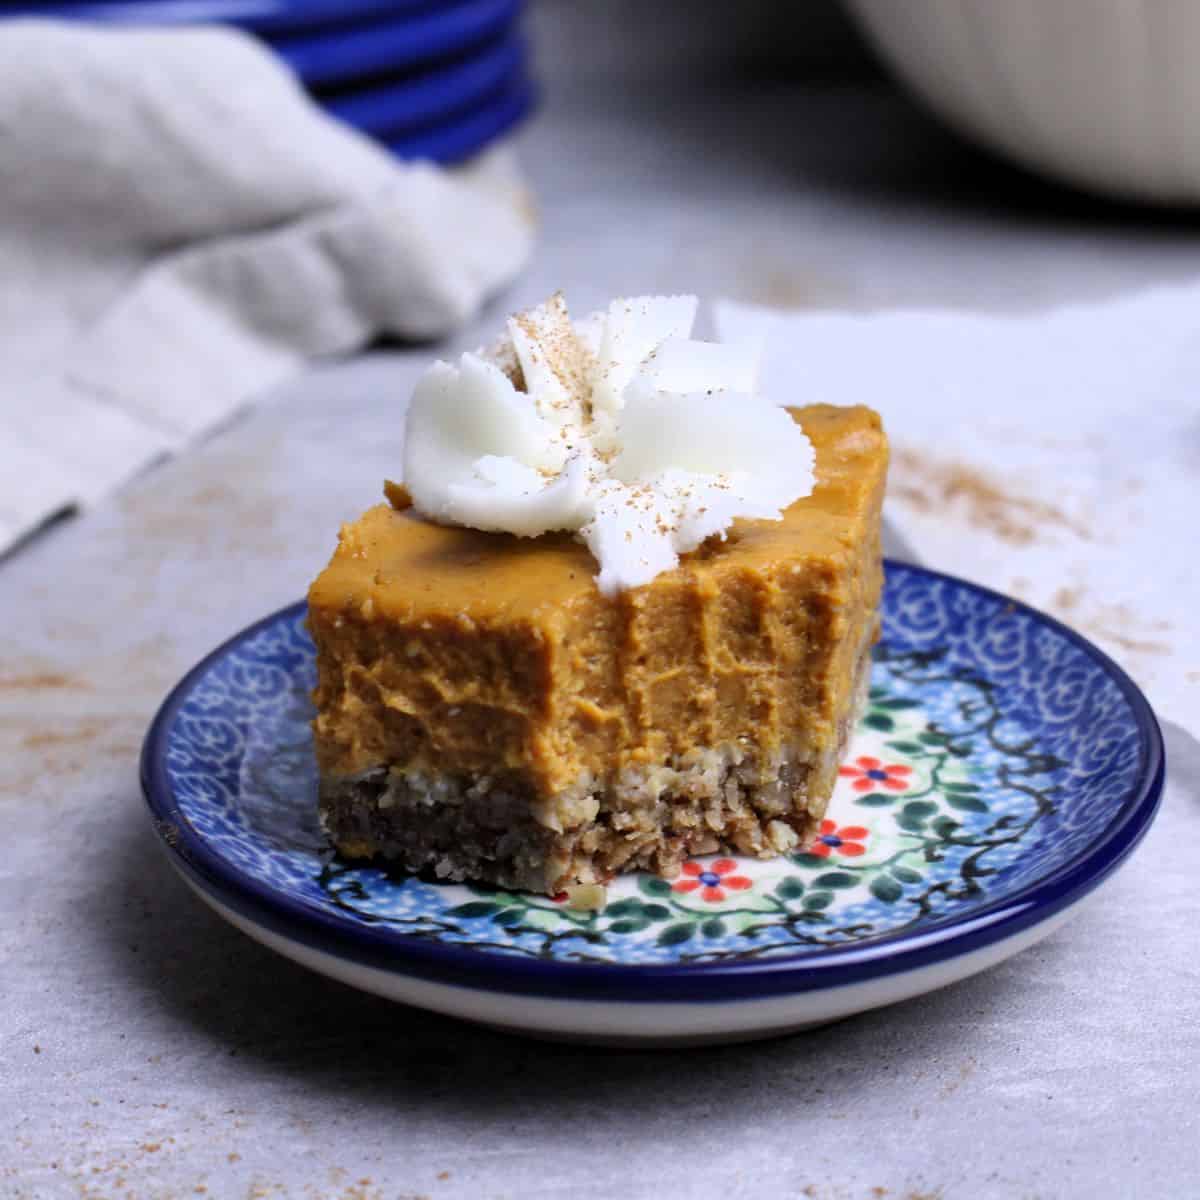 Featured image for “Creamy Pumpkin Pie bars with Oat Crust: No Refined Sugar”